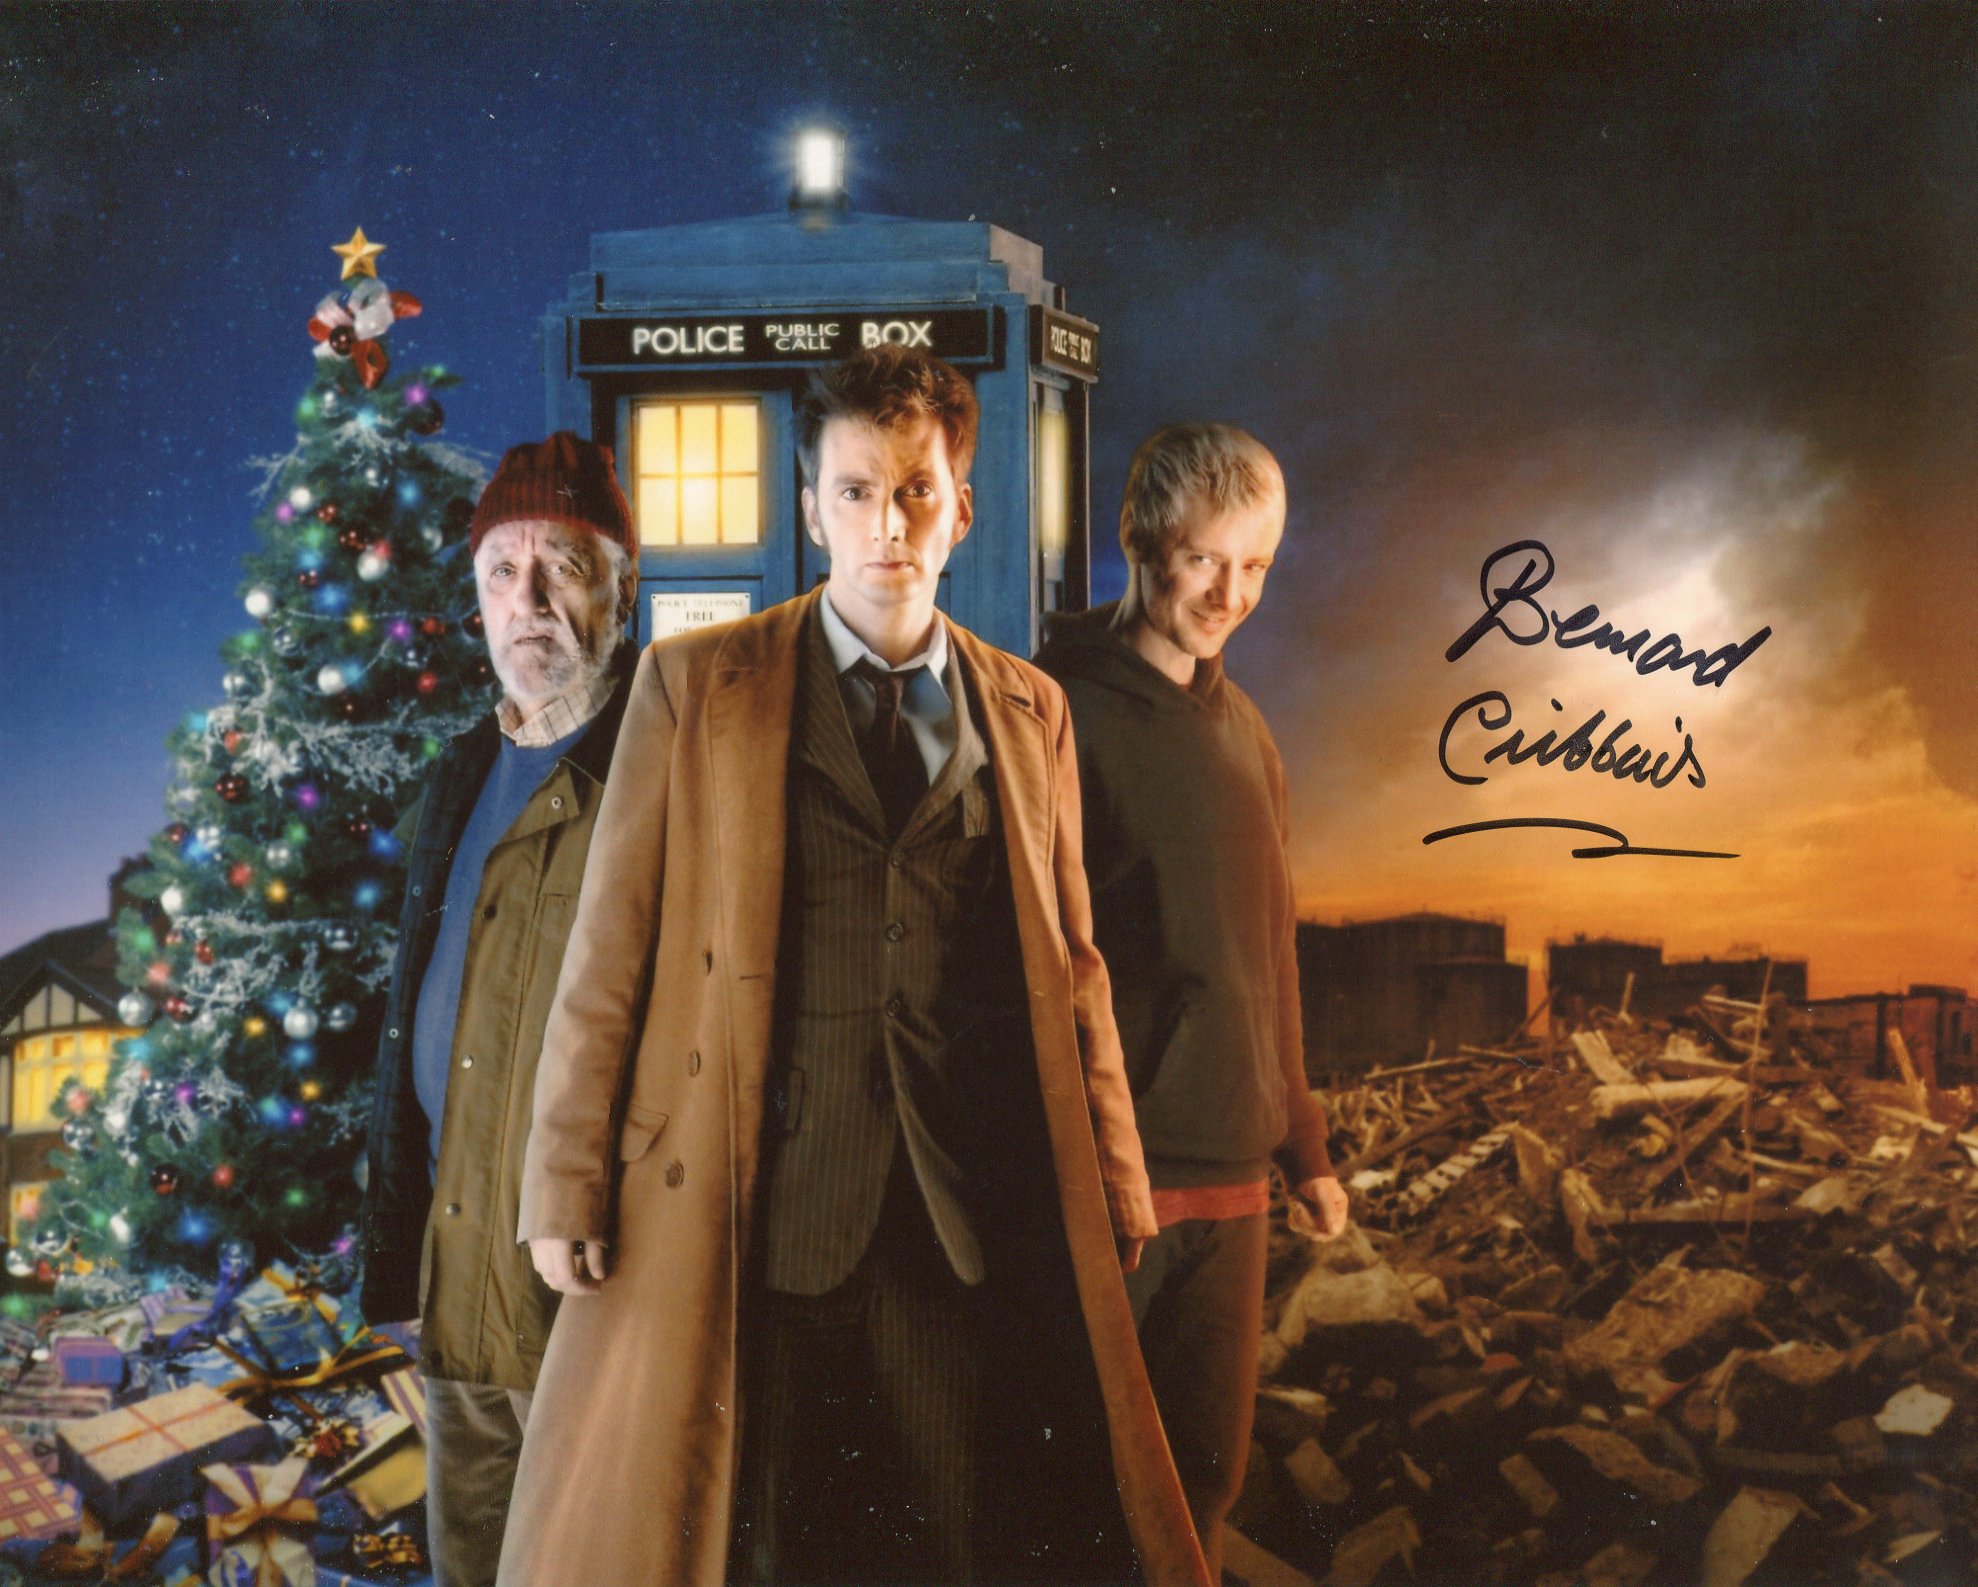 Doctor Who 8x10 photo signed by actor Bernard Cribbins. Good condition. All autographs come with a